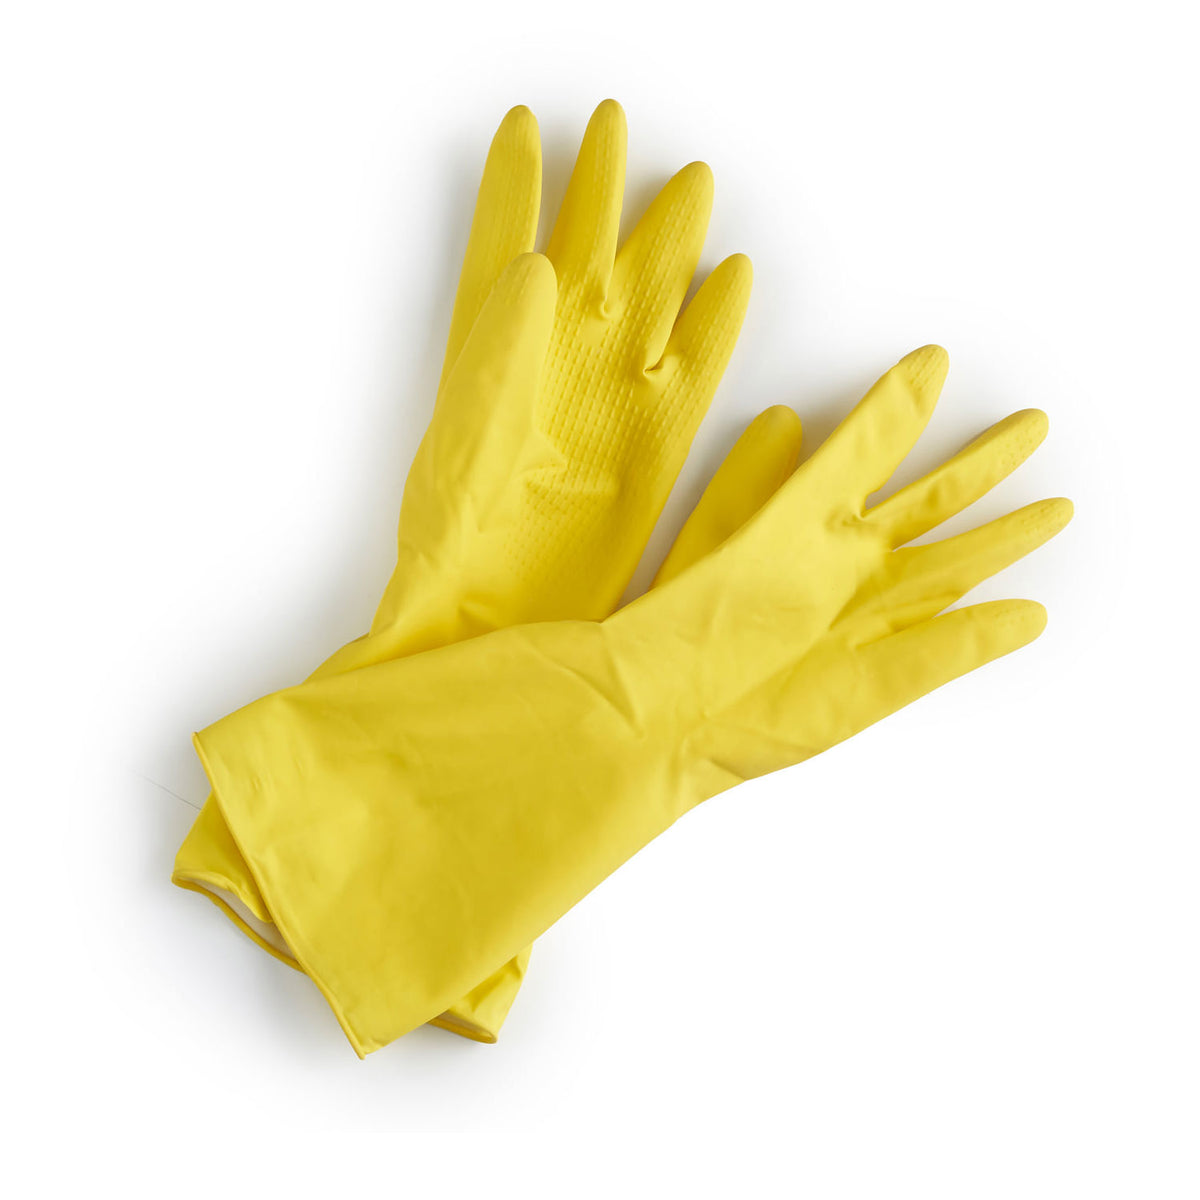 Natural Latex Rubber Gloves | Rubber Gloves - The Naughty Shrew